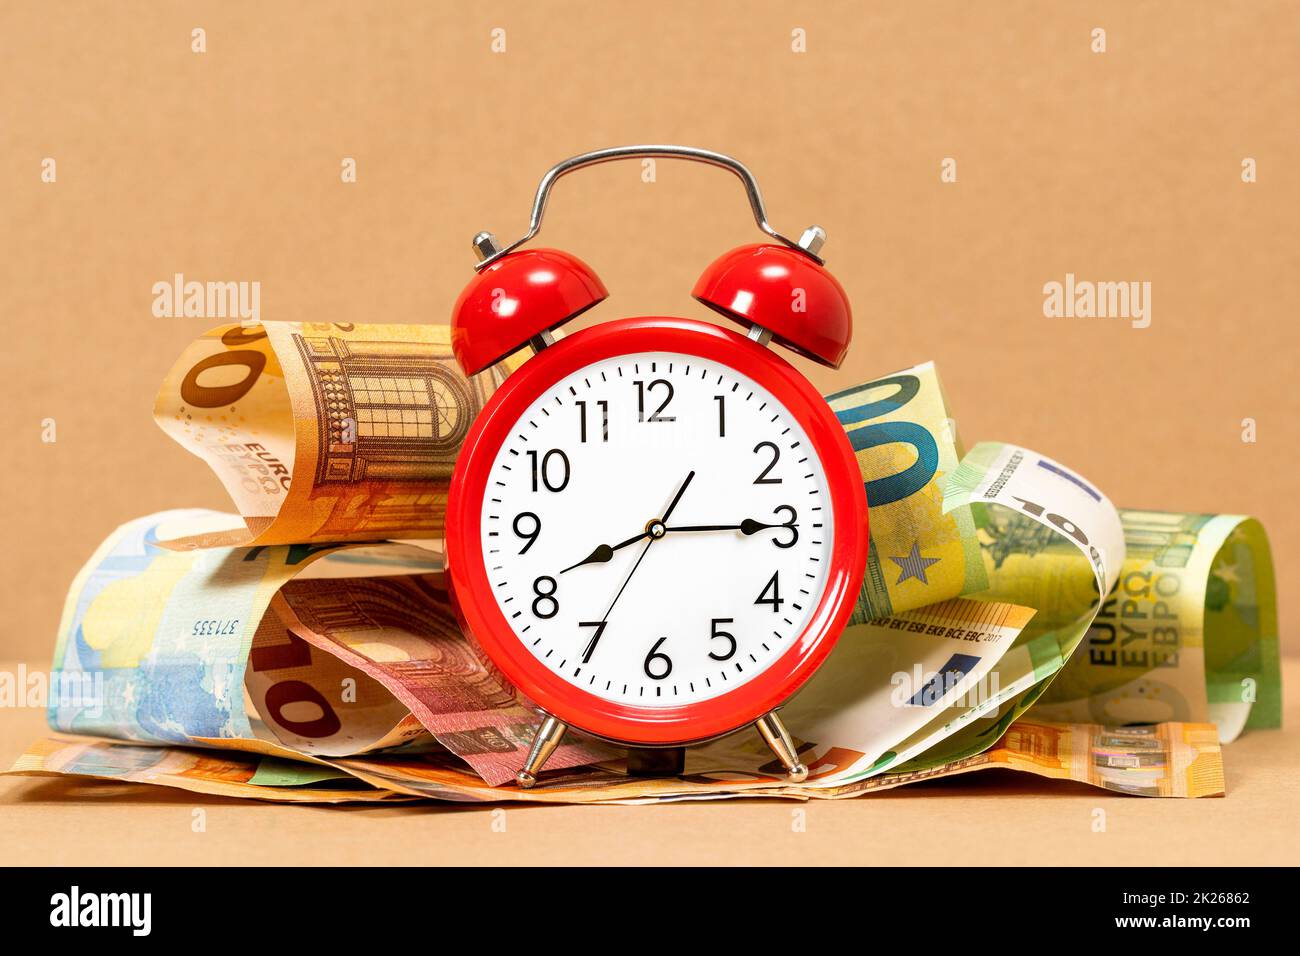 Retro style alarm clock and Euro currency Stock Photo